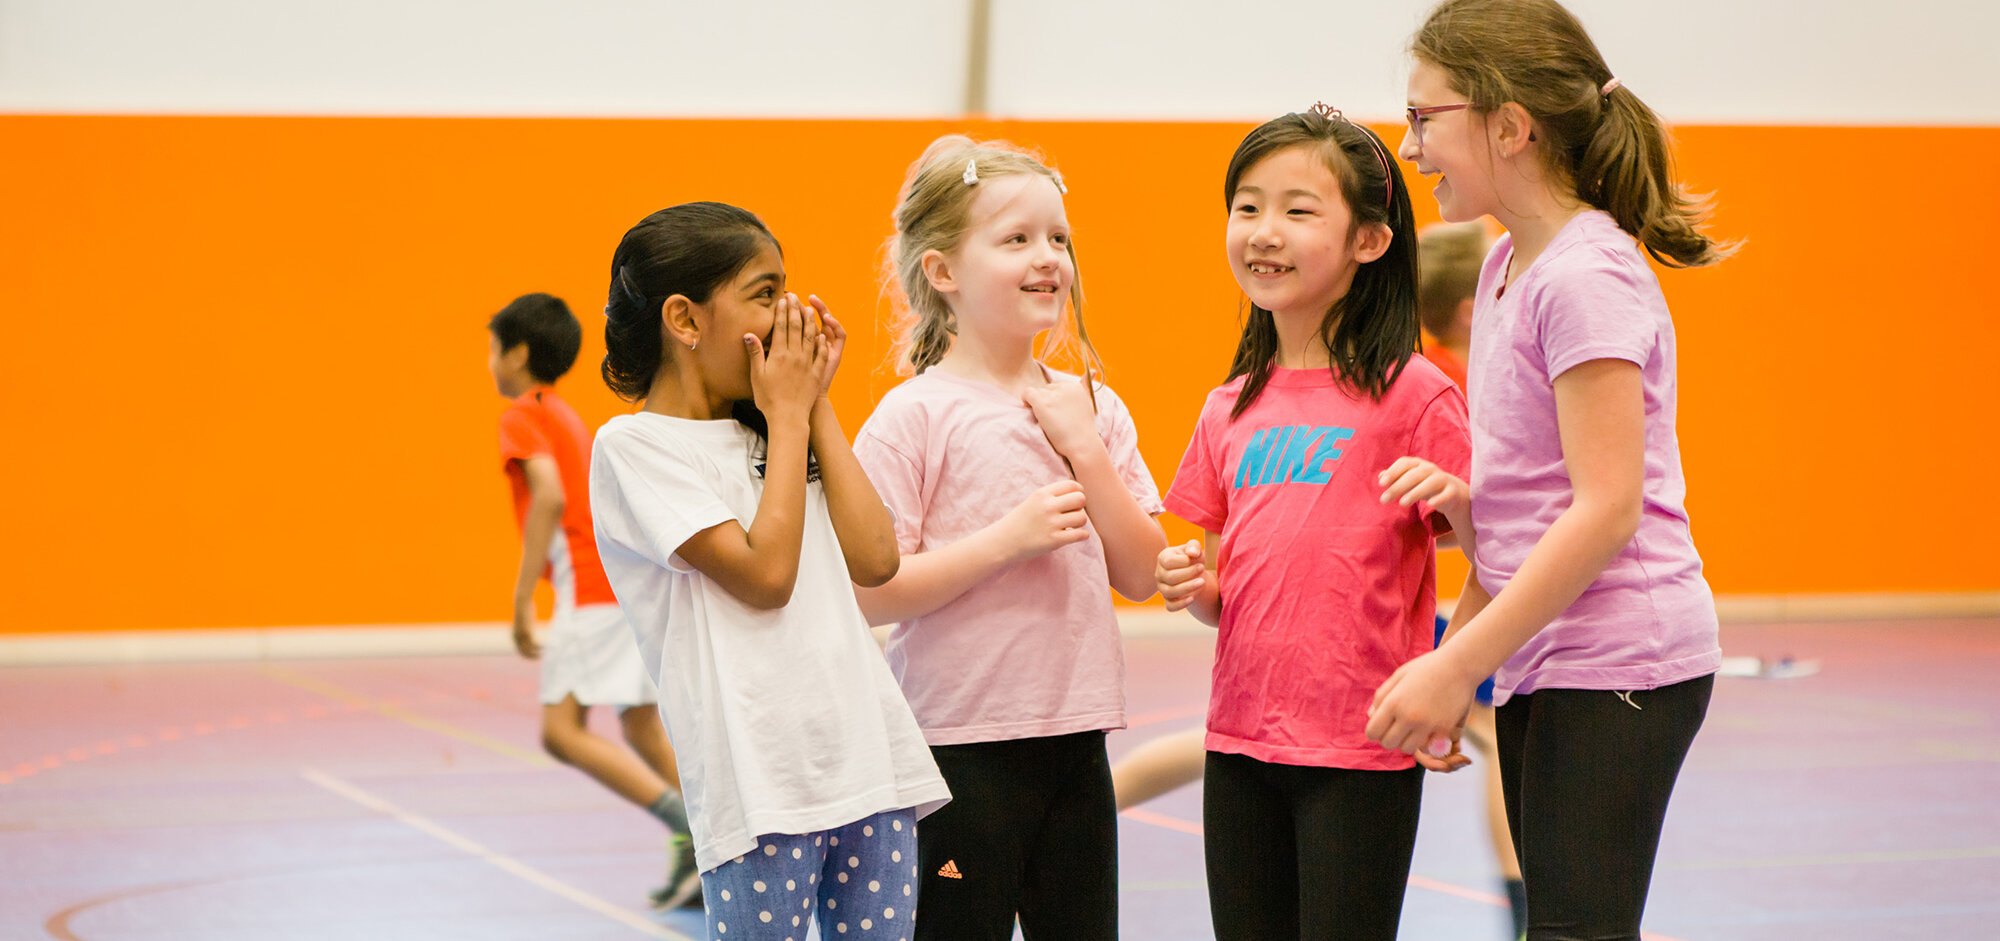 Four girls are standing together in the gym and laughing.